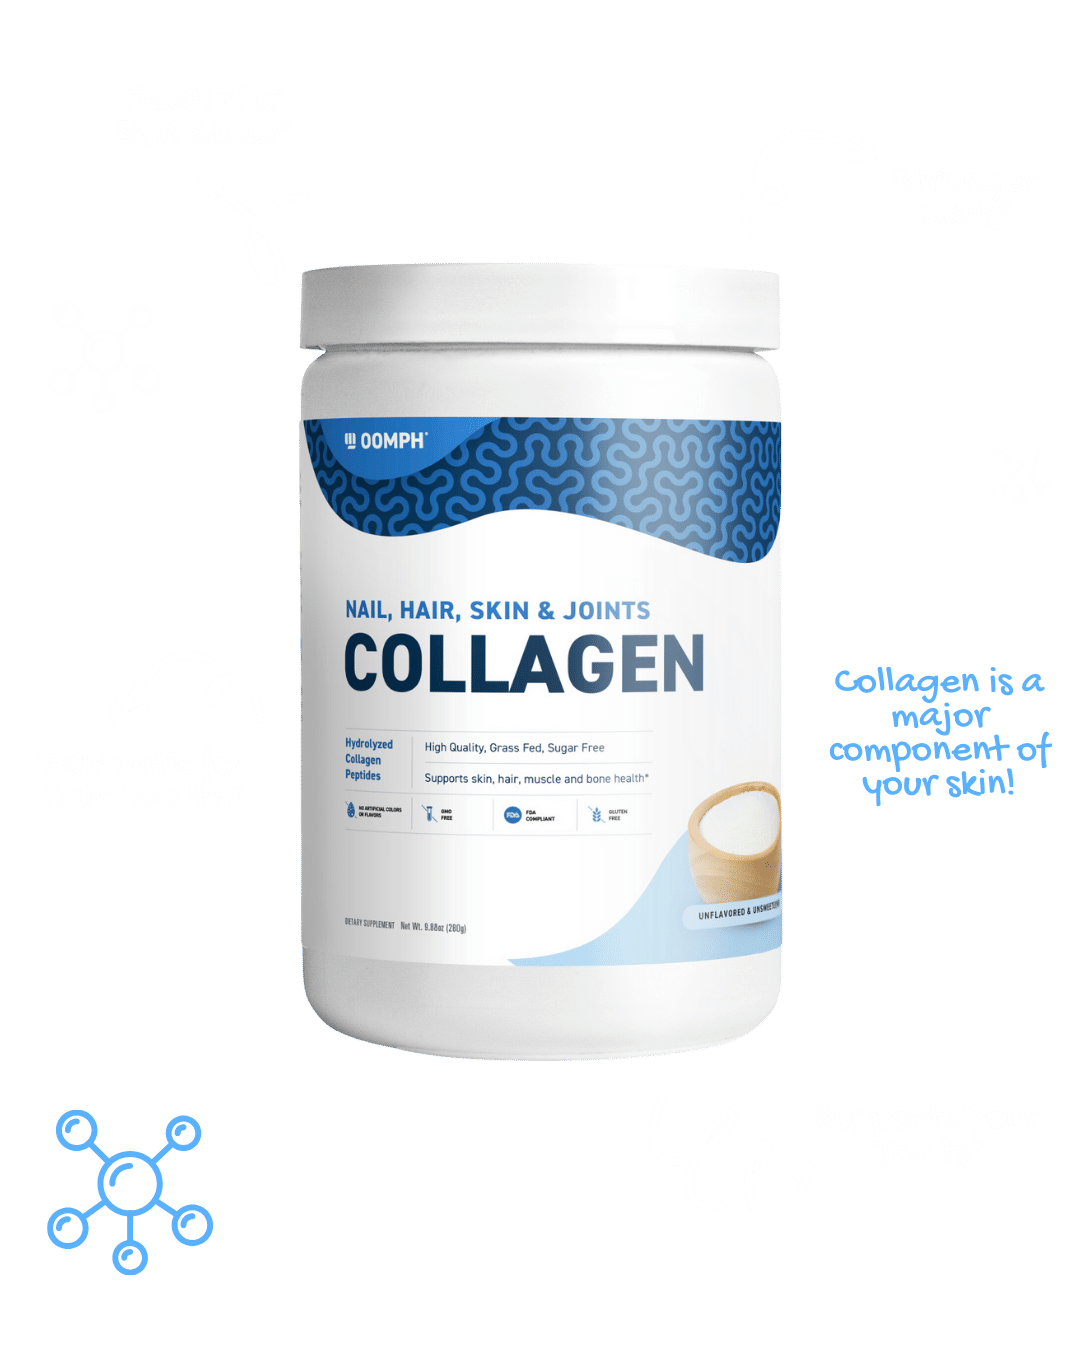 Oomph Fitness Grass Fed Collagen Peptides for Nail, Hair, Skin, and Joint Health